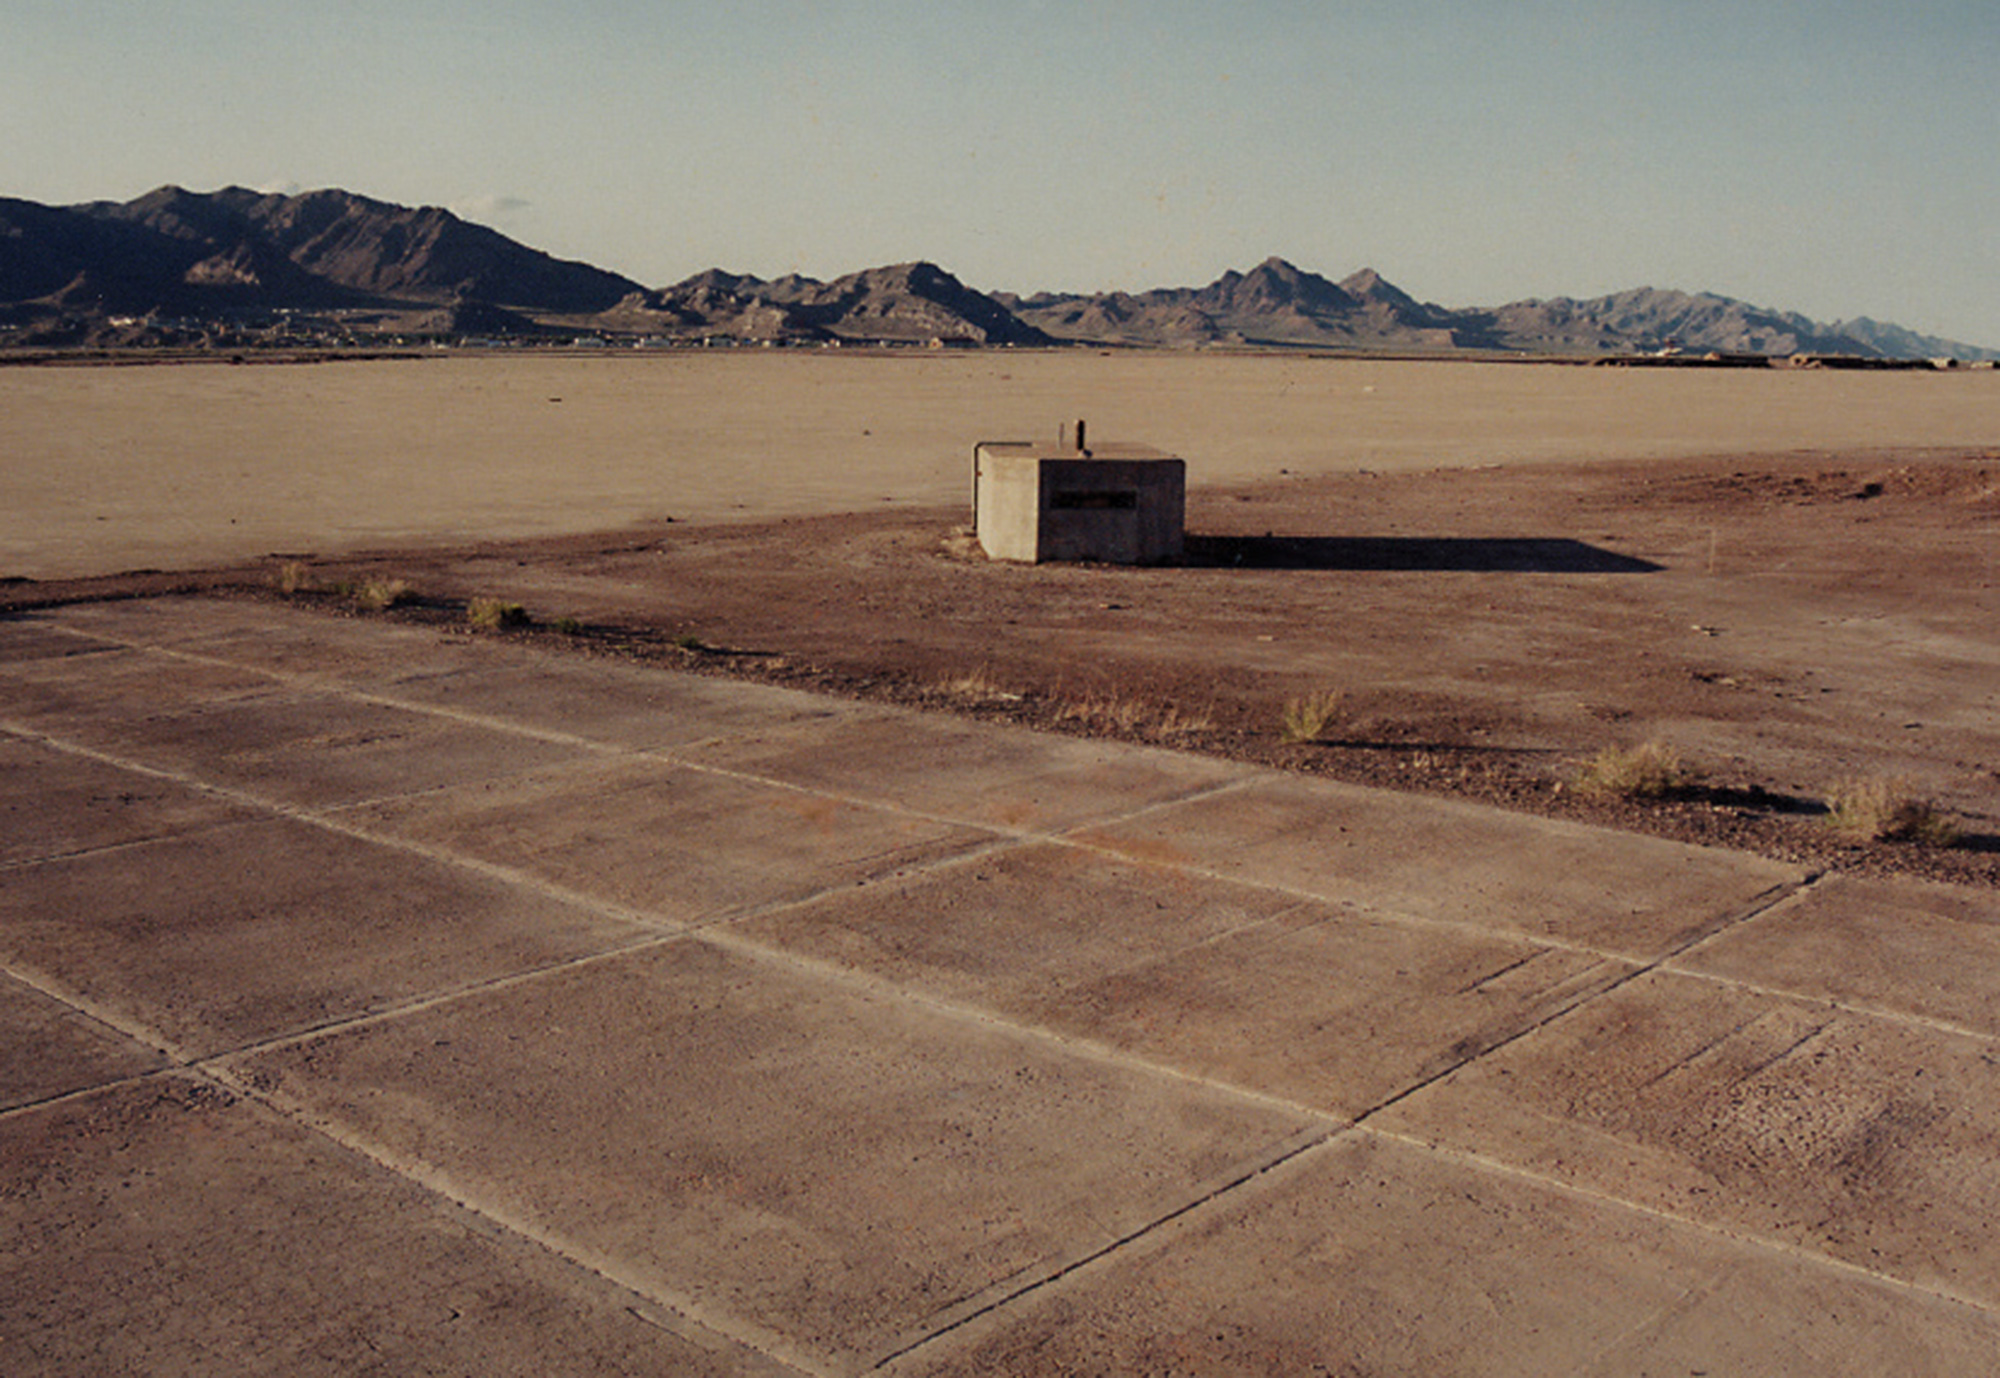 A photograph of a launch pad bunker in a desolate landscape.